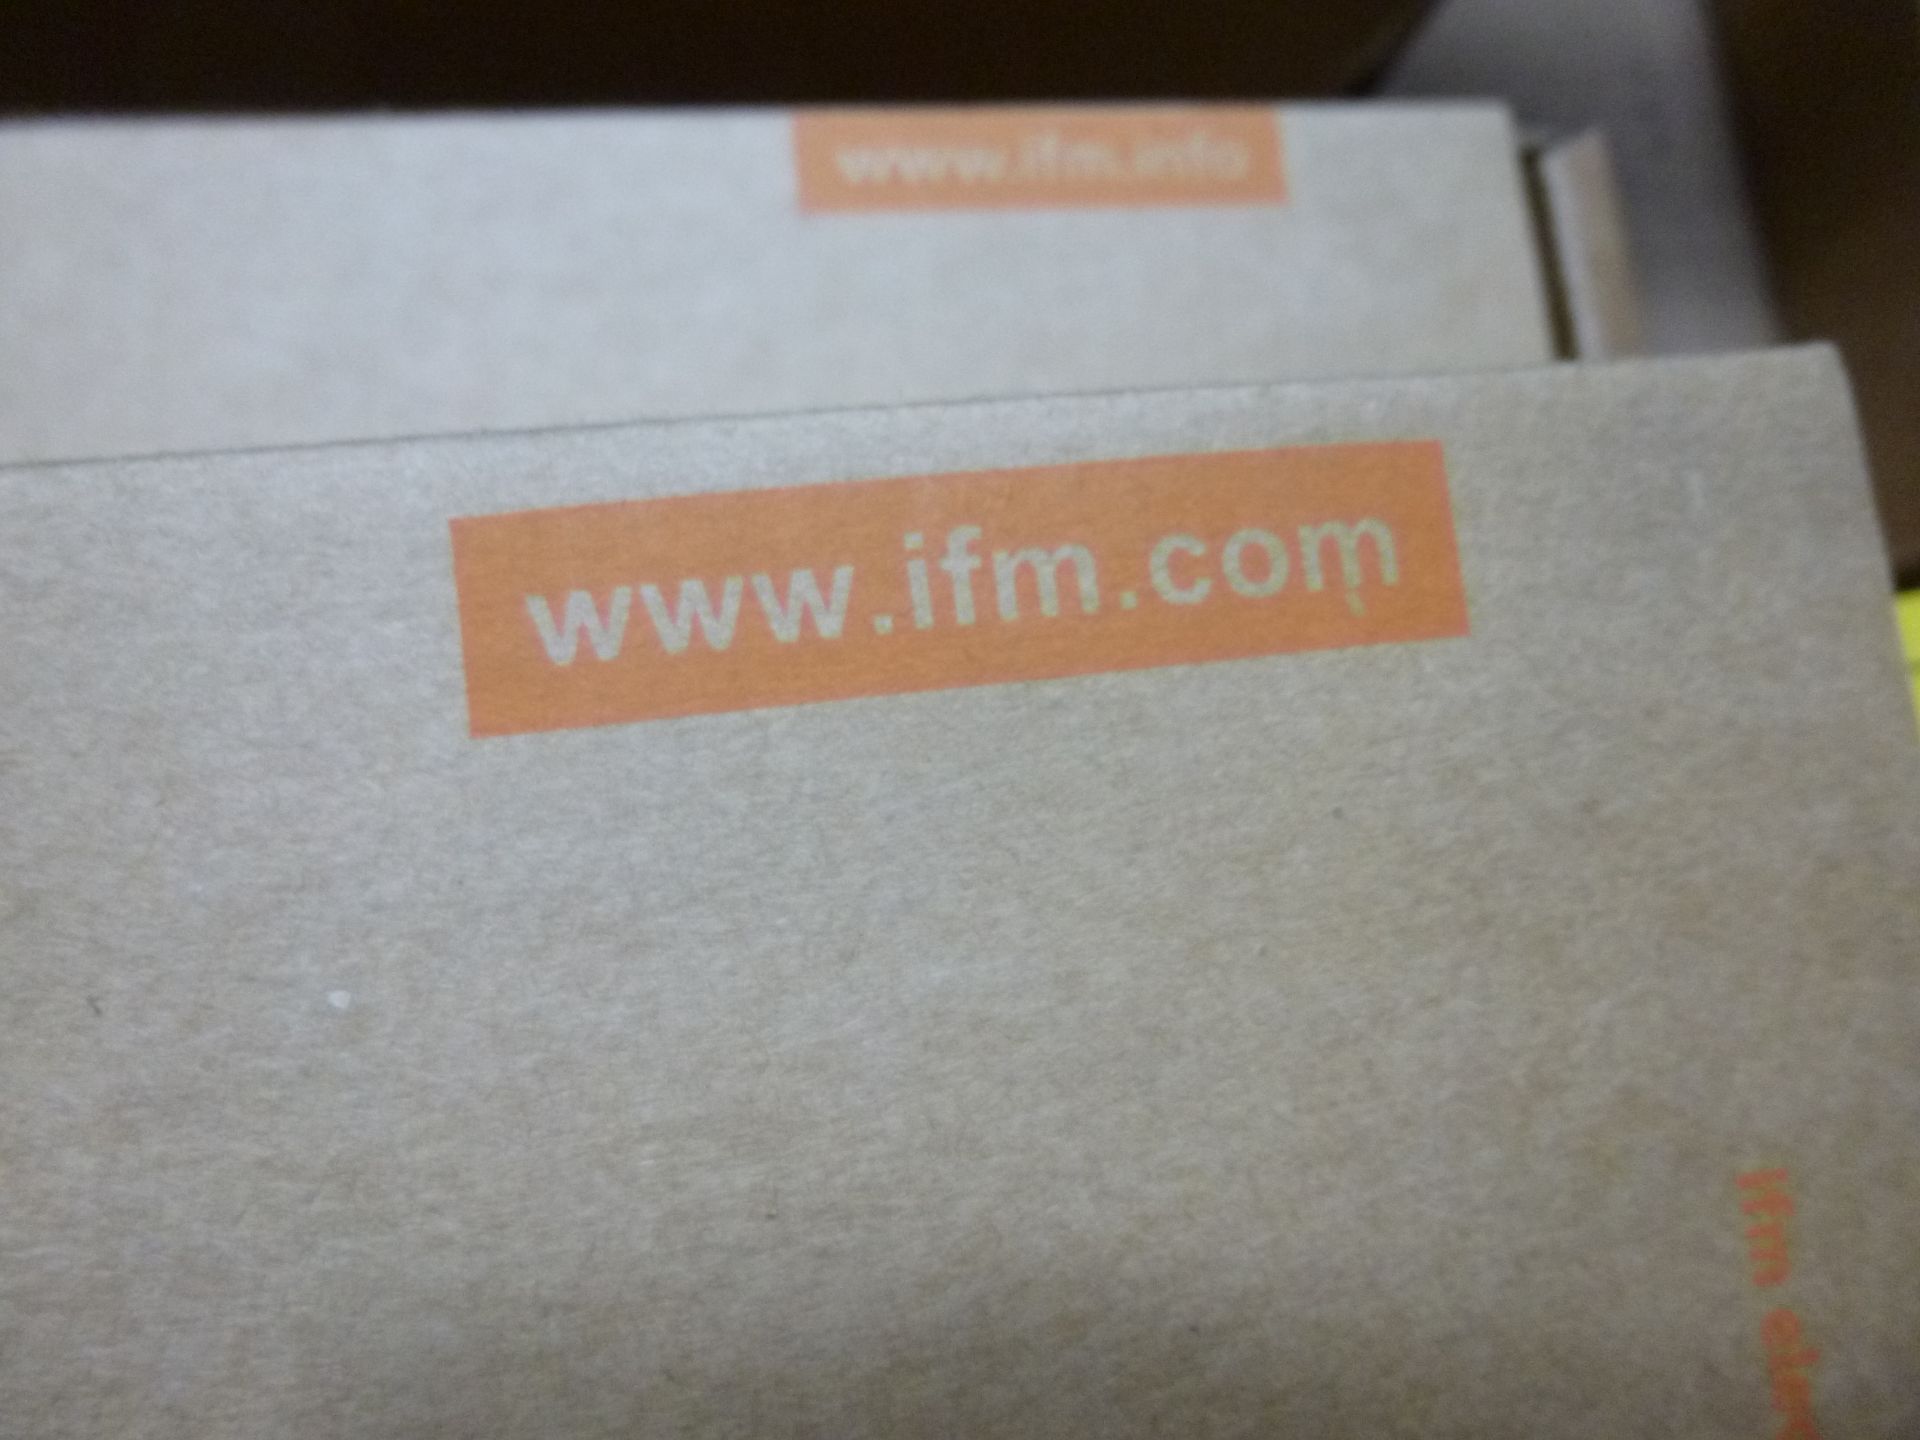 (Qty 6) IFM part number E43312 ( new in boxes) Shipping can be prepared for either ground package or - Image 4 of 4